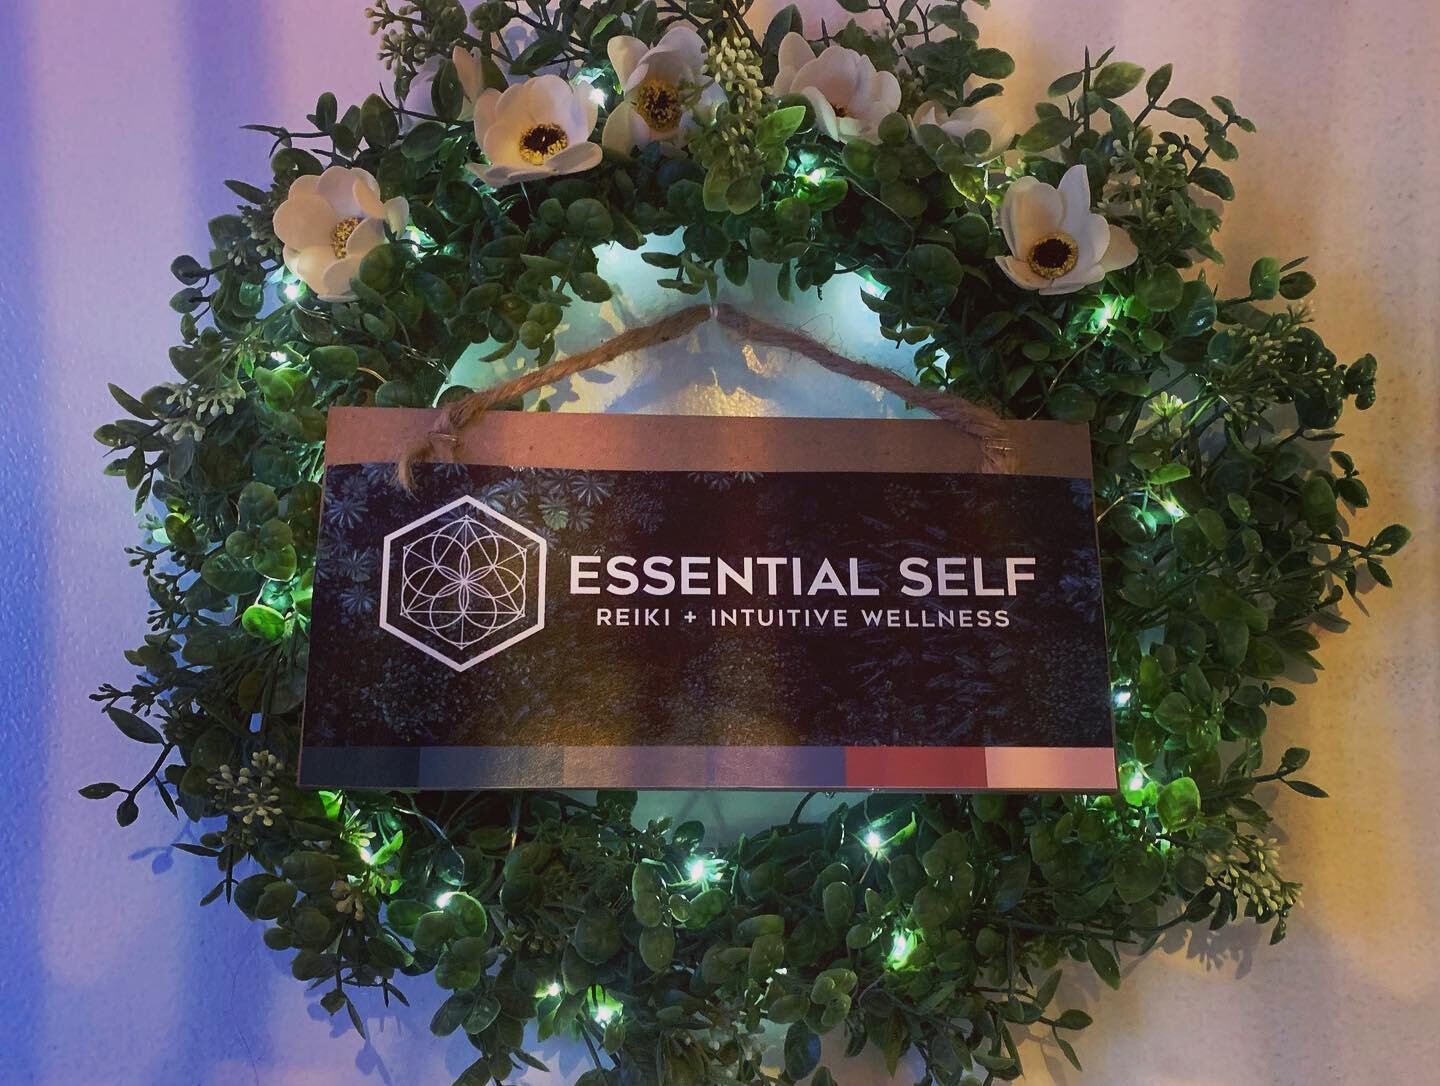 Come in to our office to experience some soothing Reiki. Our goal at Essential Self is to empower you to find the healer within! 

To book: www.EssentialSelfReiki.com

#essentialselfwellness #reikihealing #dailyreiki #selfcarejourney #energyhealer